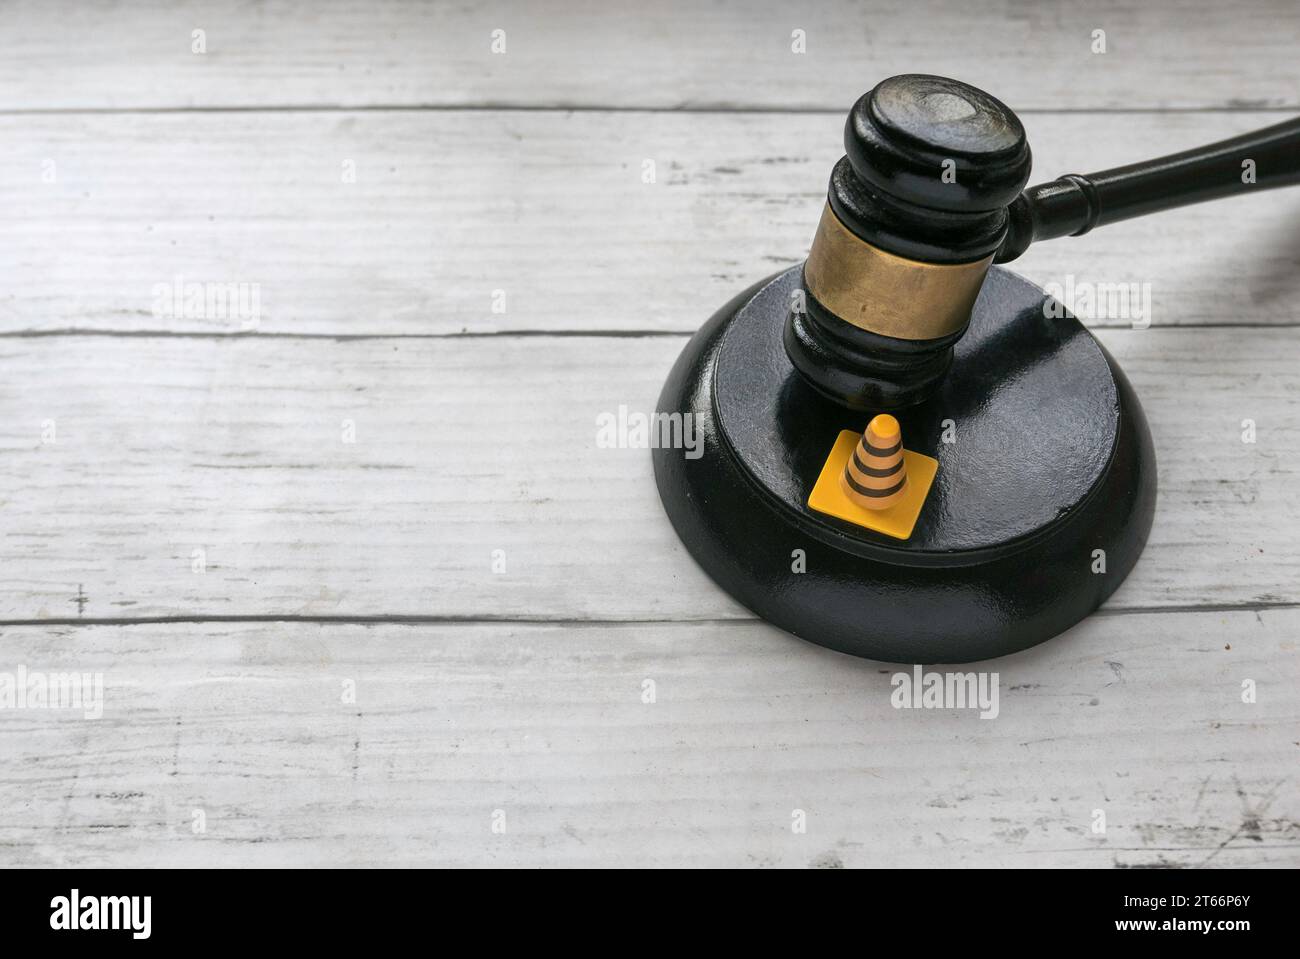 Traffic cone and gavel over a wooden background. Stock Photo